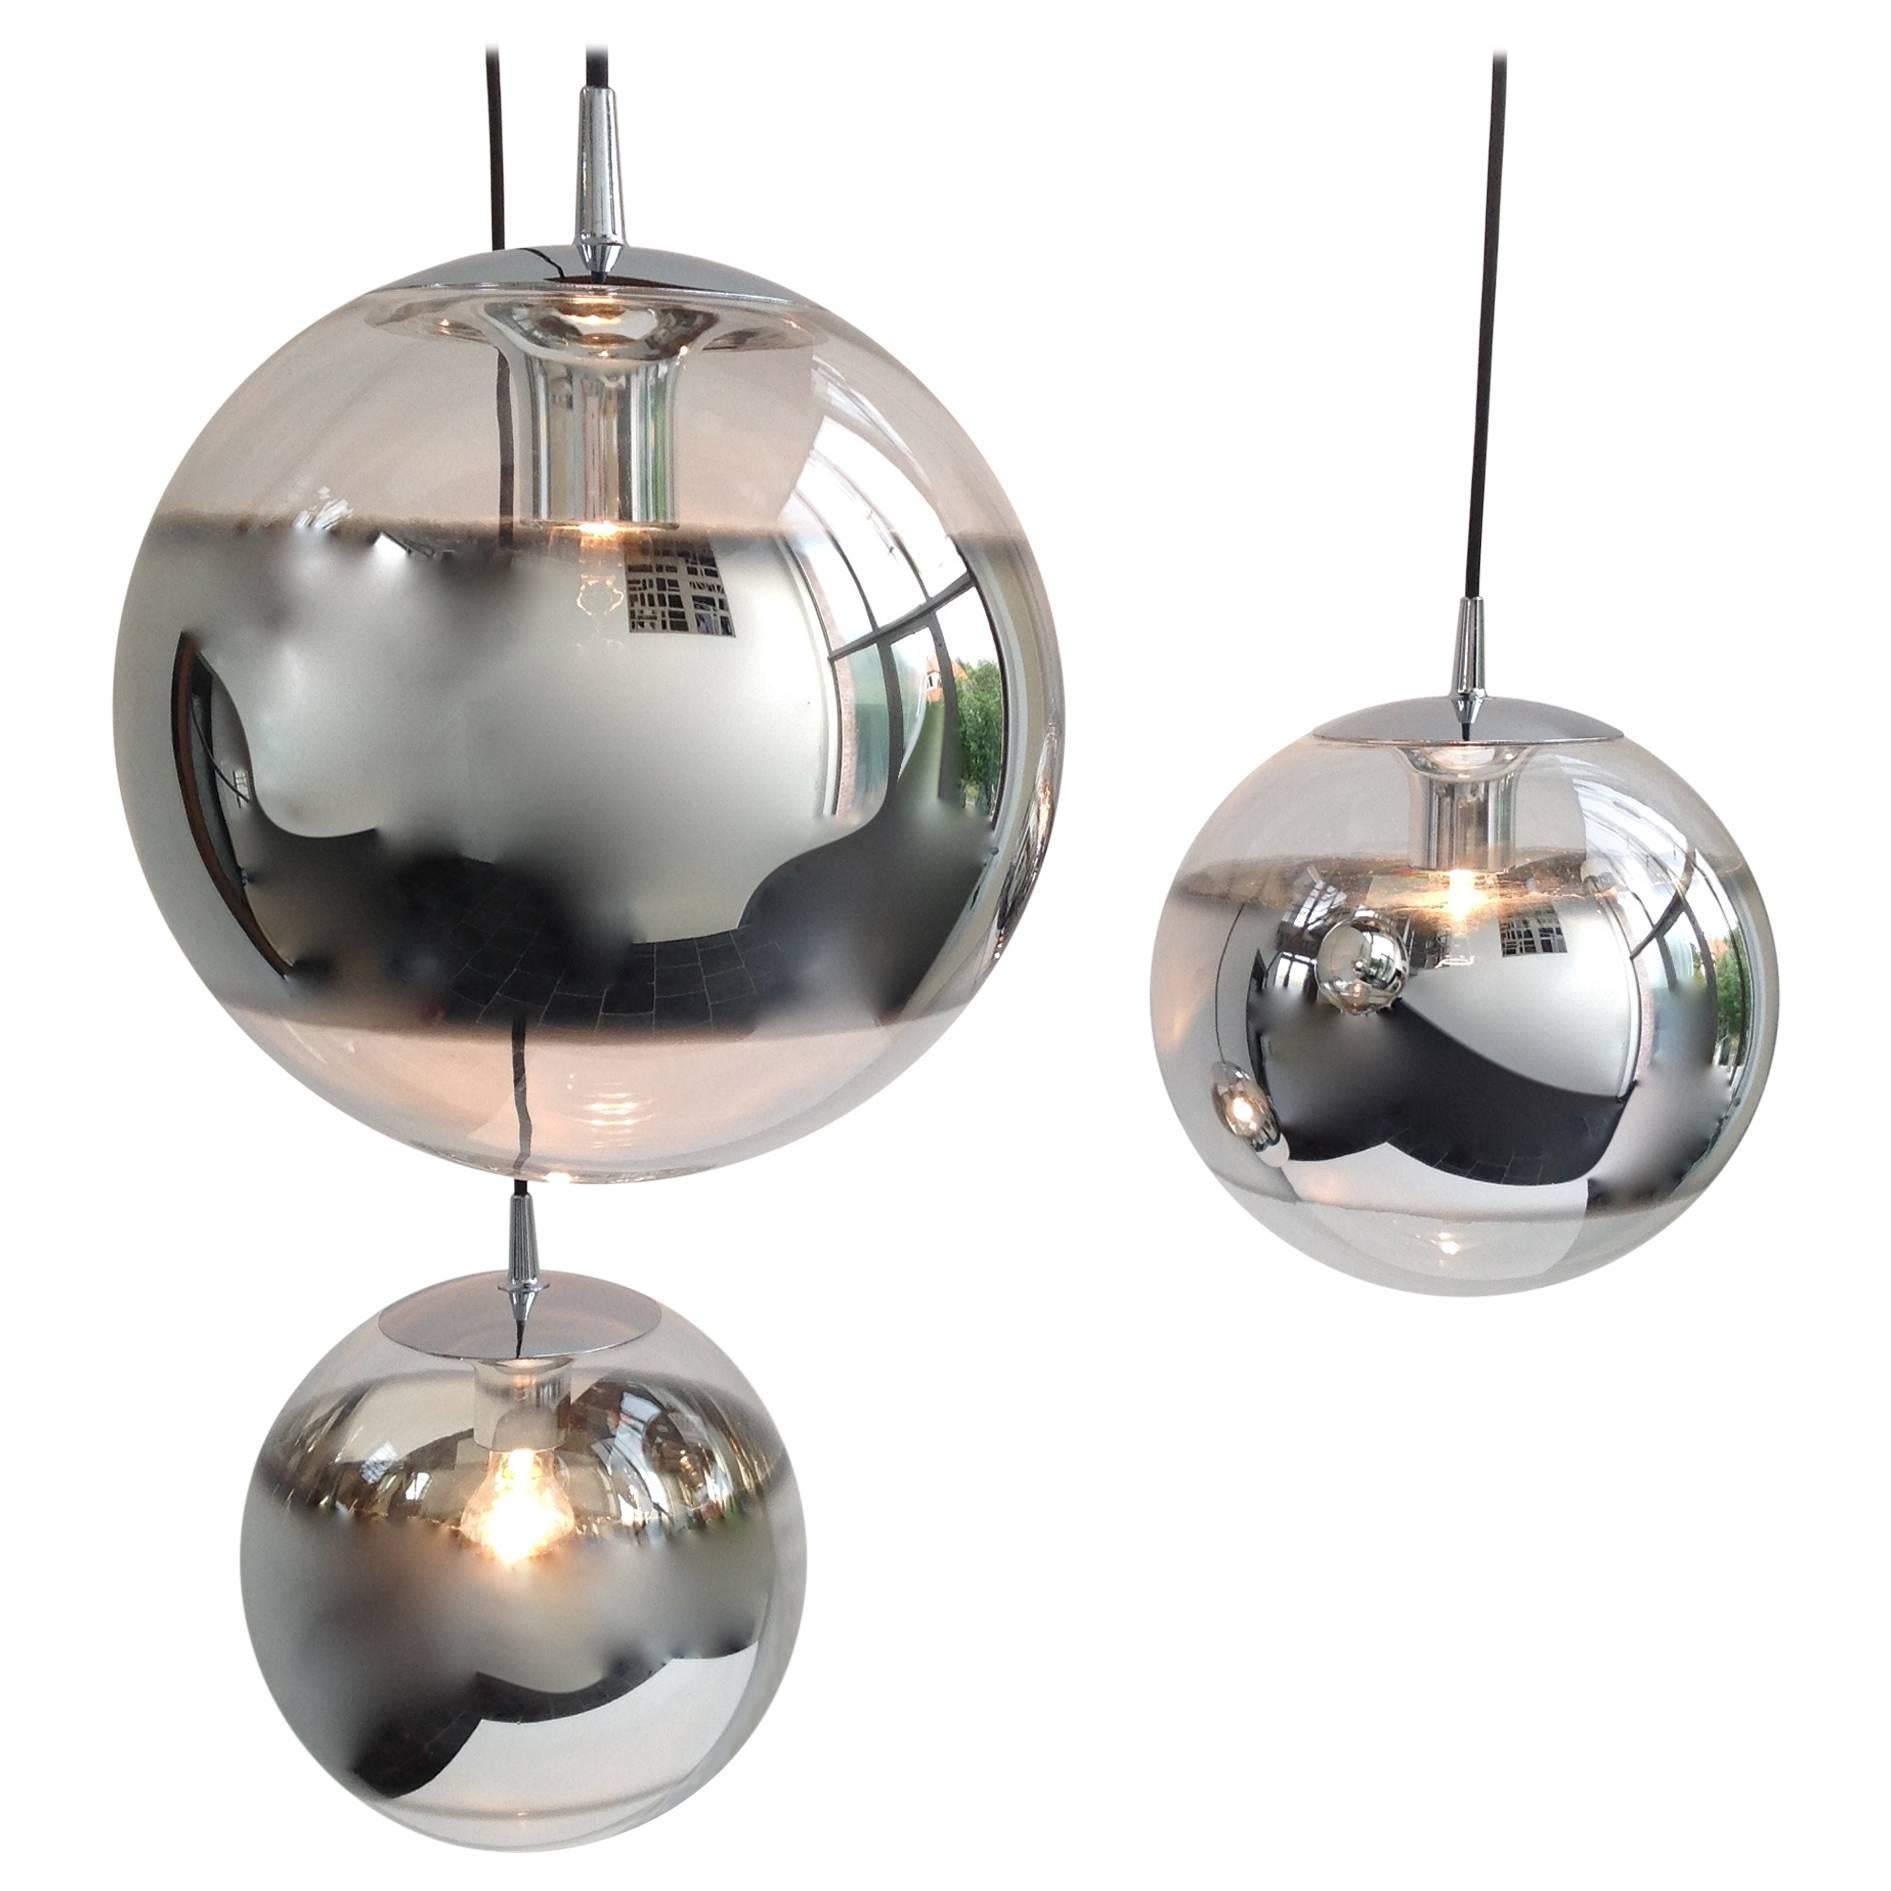 Three Amazing Glass Globes with Integrated Mirror, Anno, 1960 For Sale